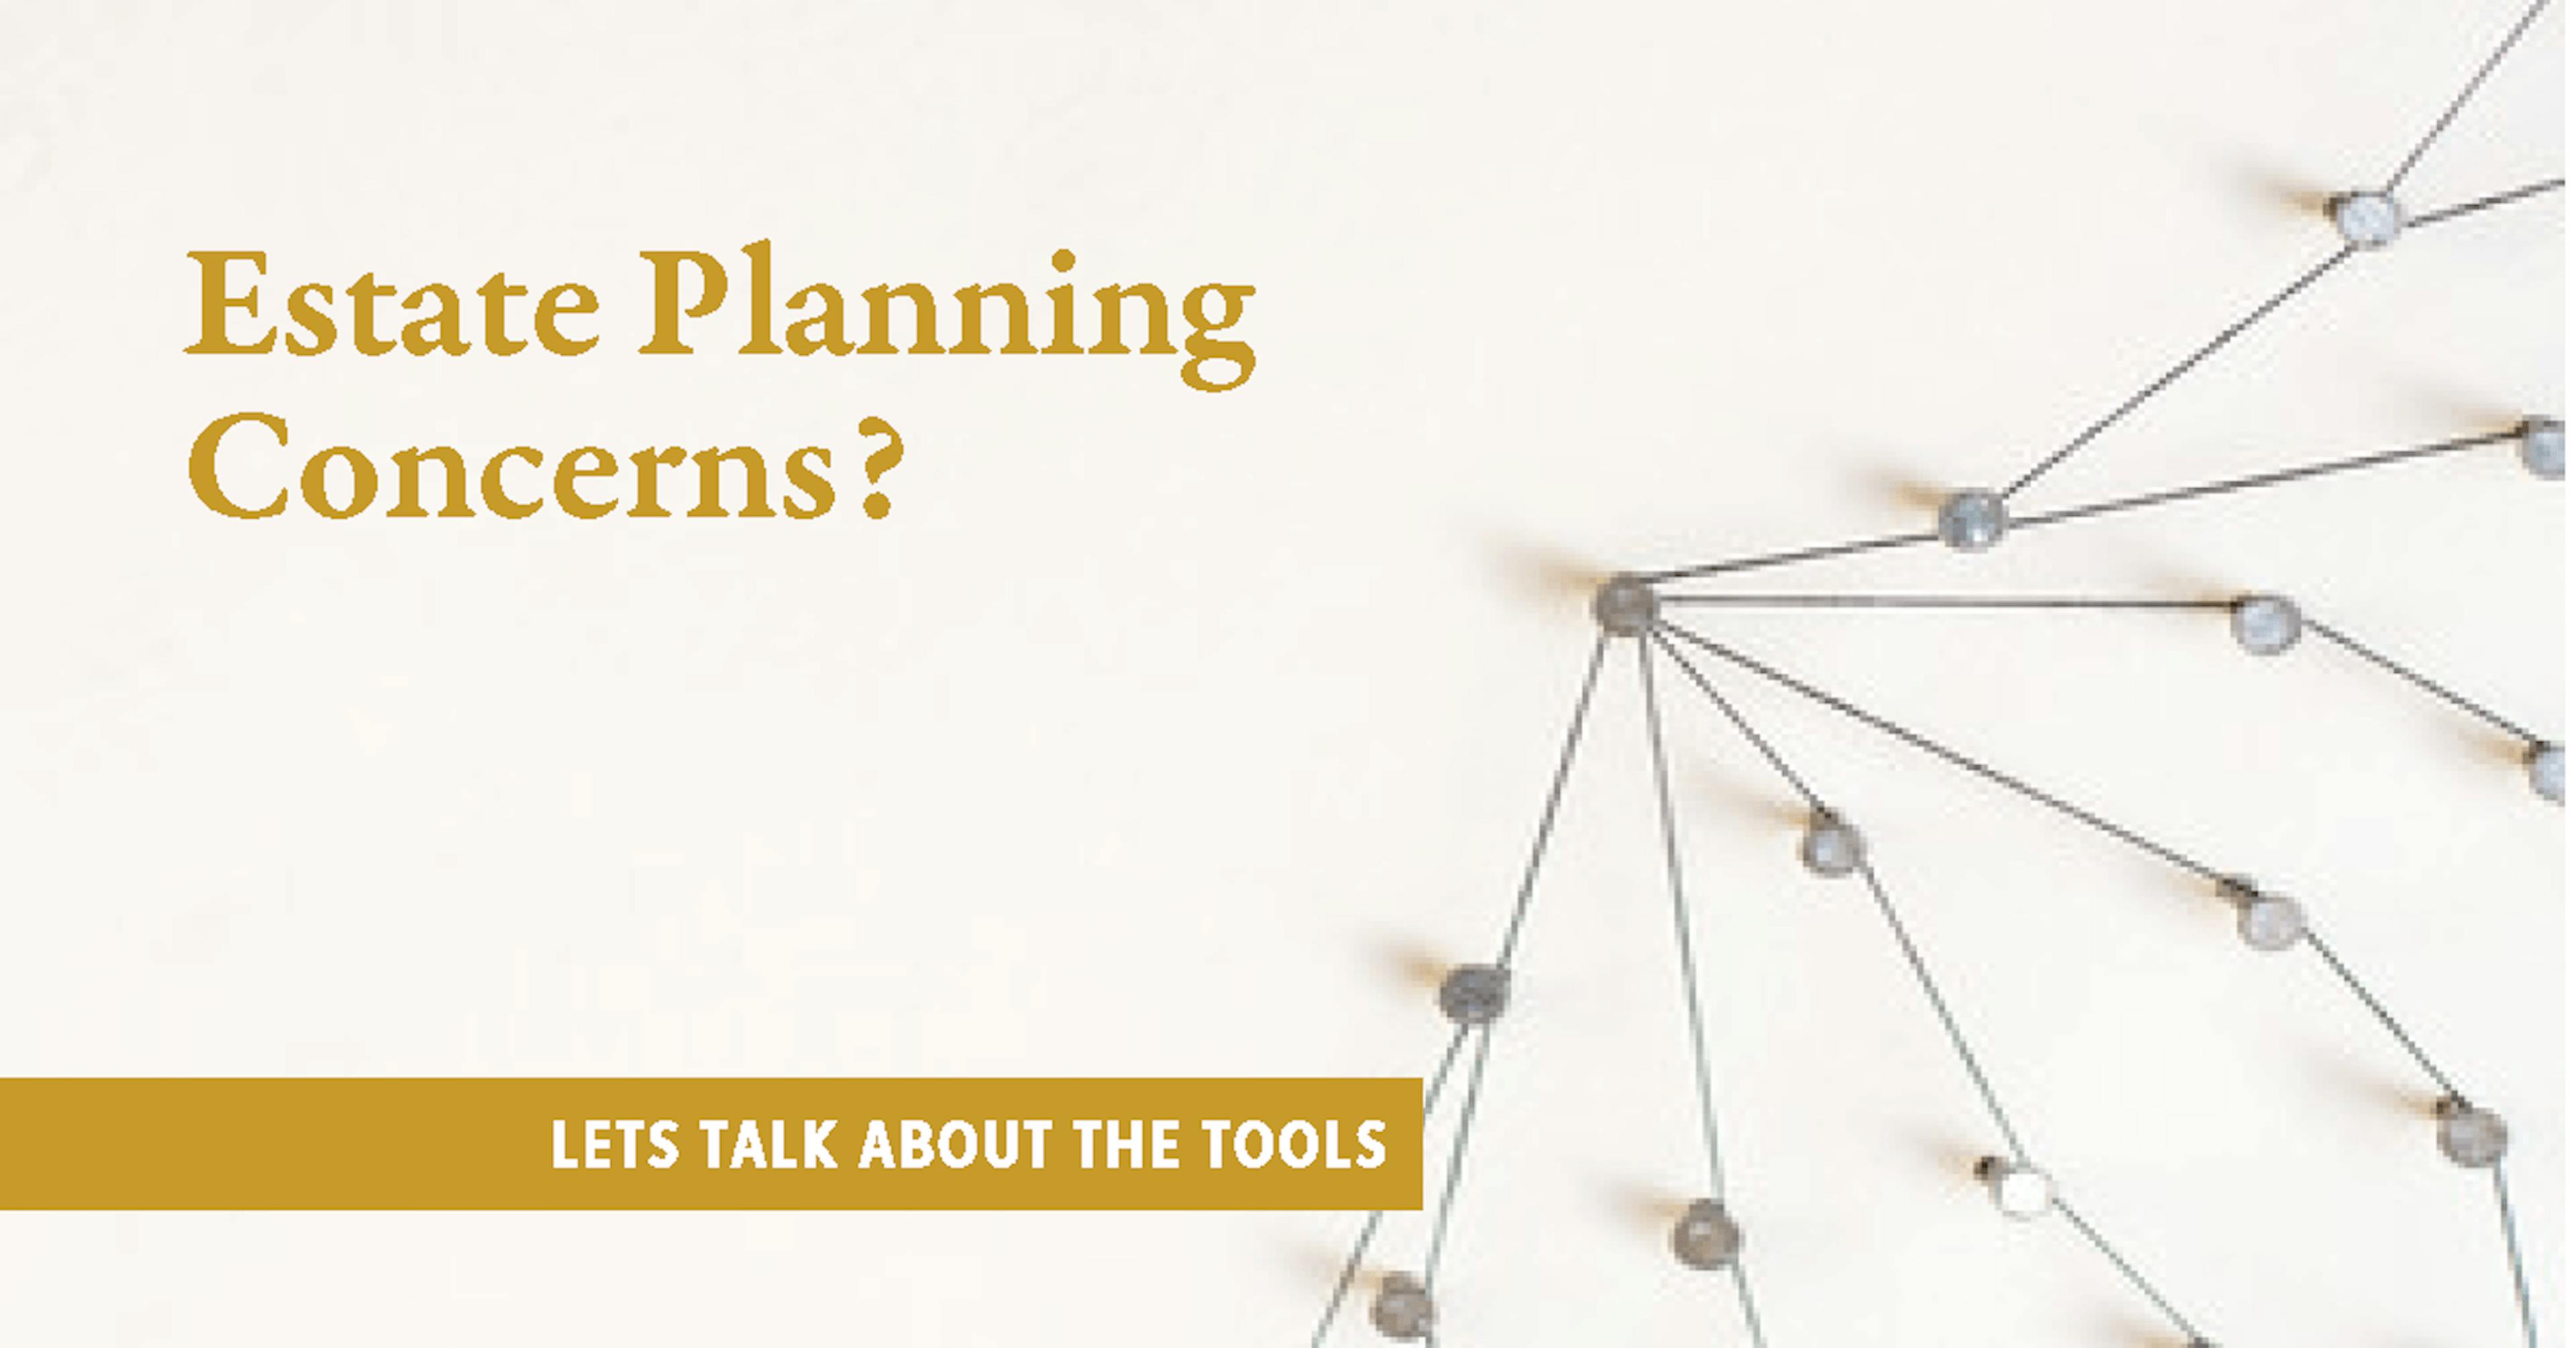 Text reading 'Estate Planning Concerns? Let's talk about the tools' next to an image of wires hanging from nails in the walls.